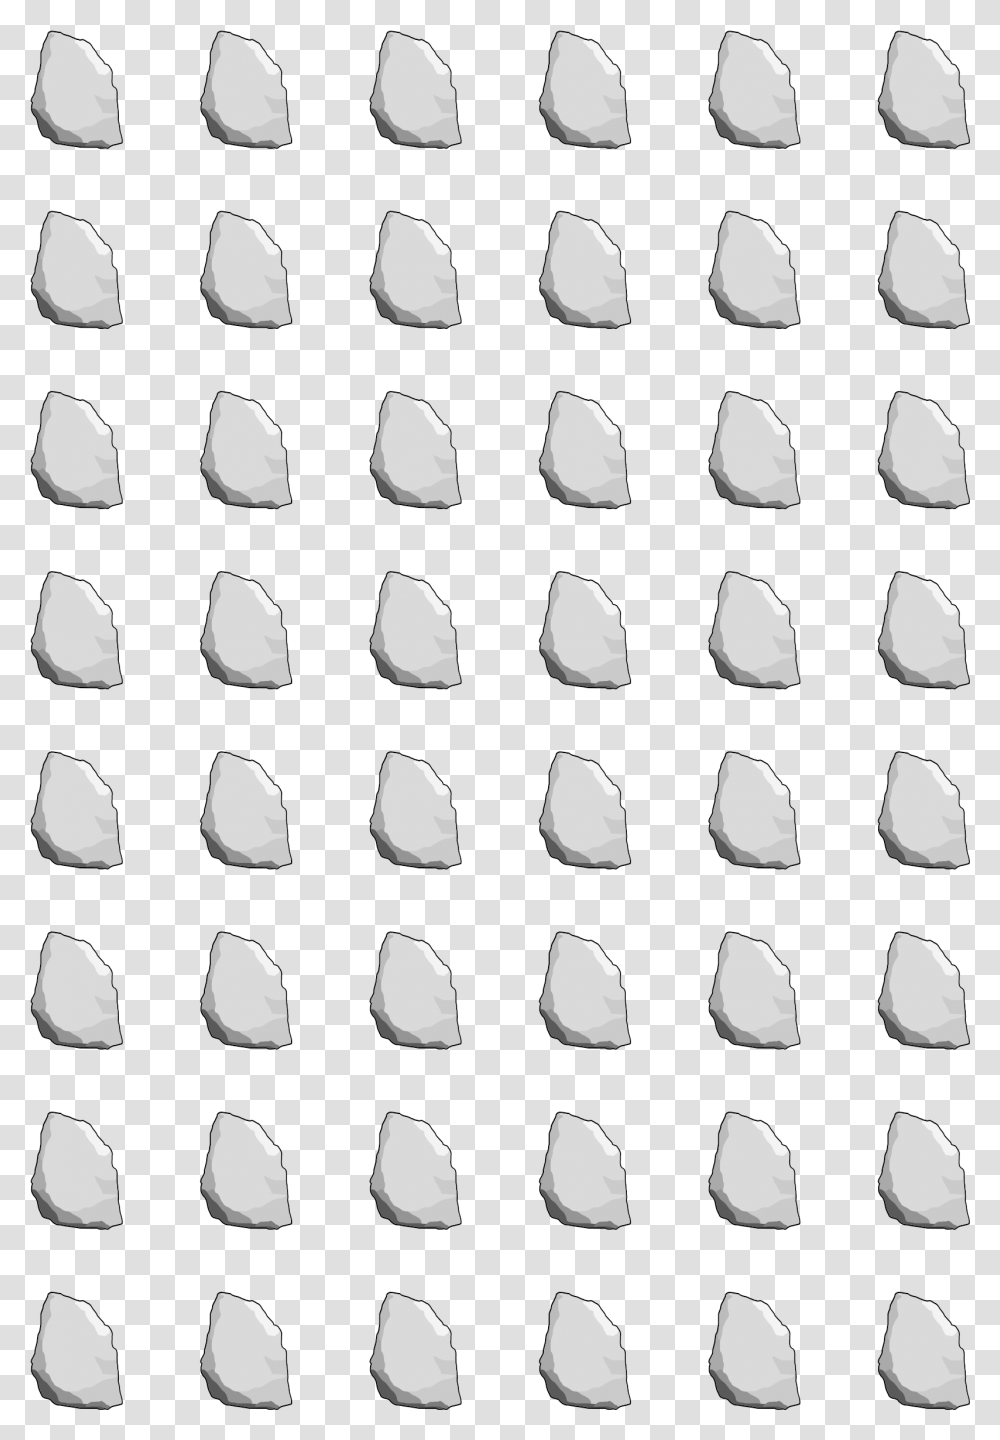 This Free Icons Design Of A4 Sheet Of Stones Without Chair, Rug, Arrowhead Transparent Png